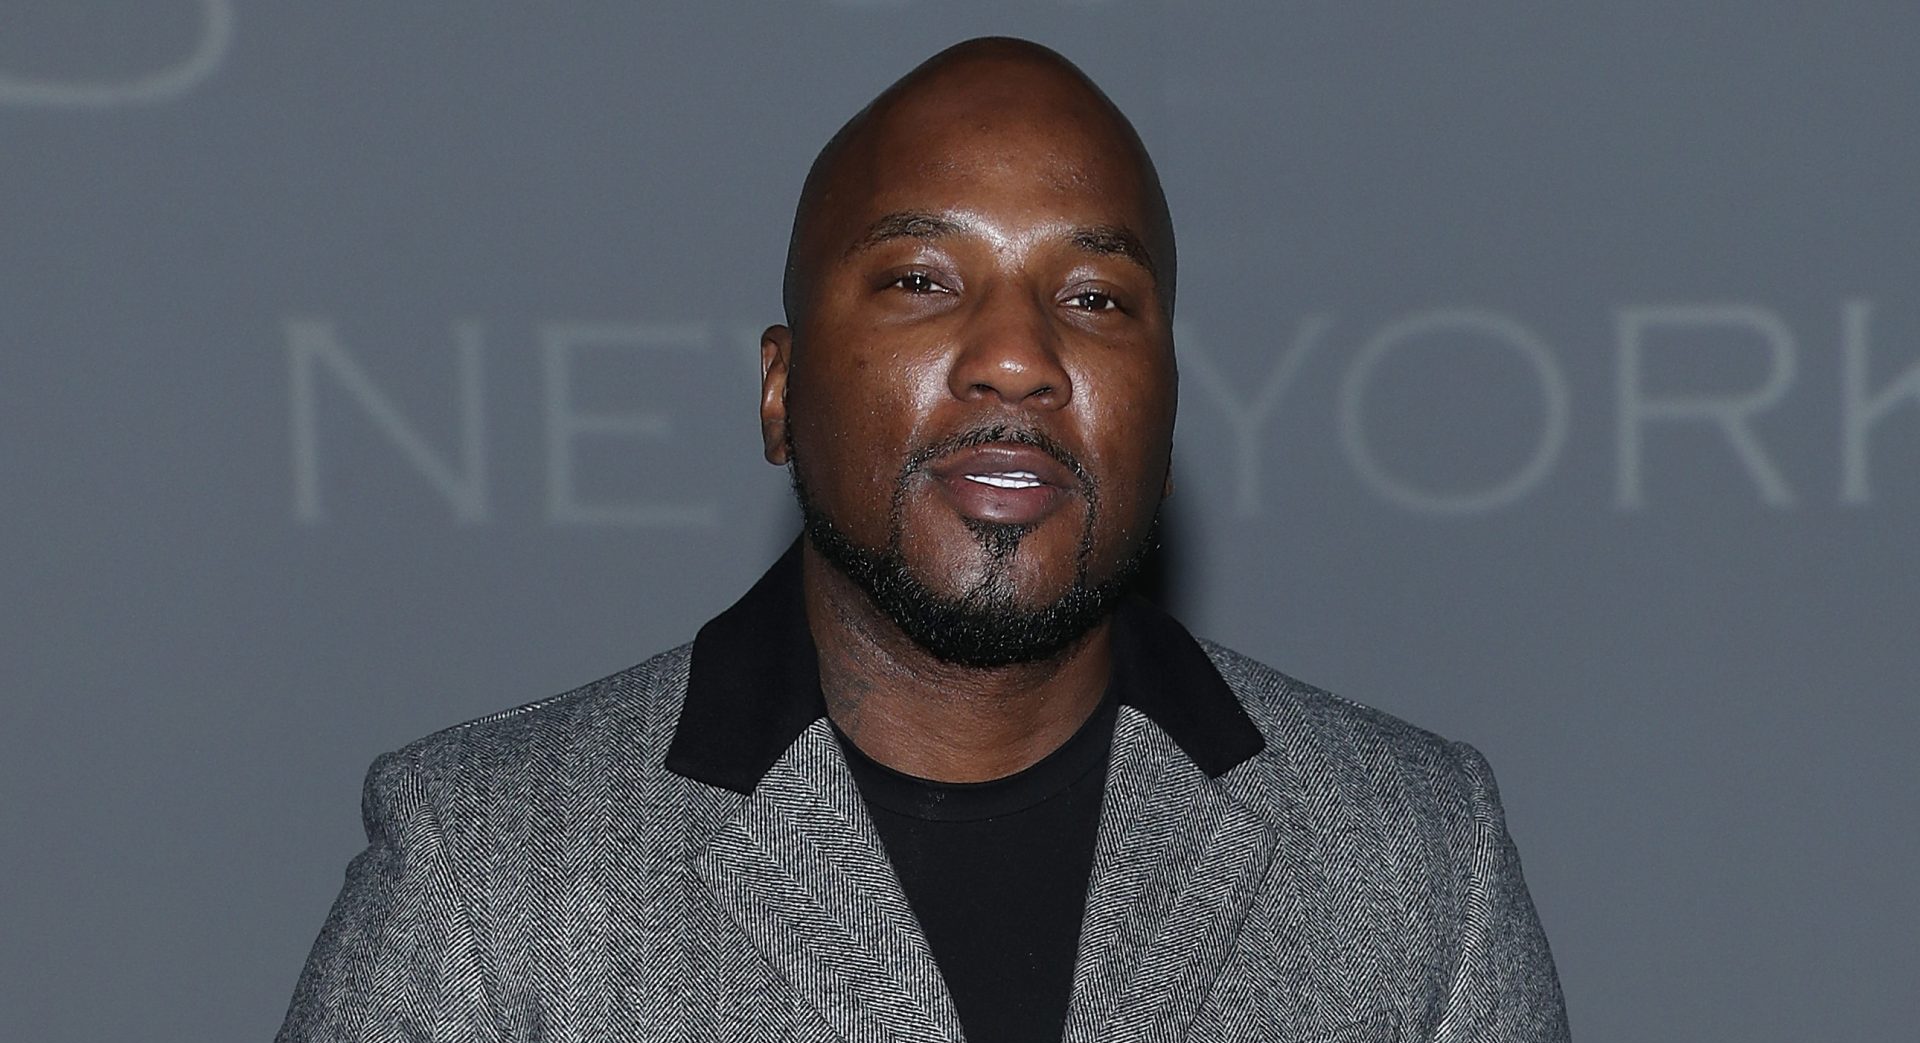 Social Media Applauds Jeezy After He Speaks About Experiencing Depression For 8 Years: 'Powerful Testimony To Resilience'